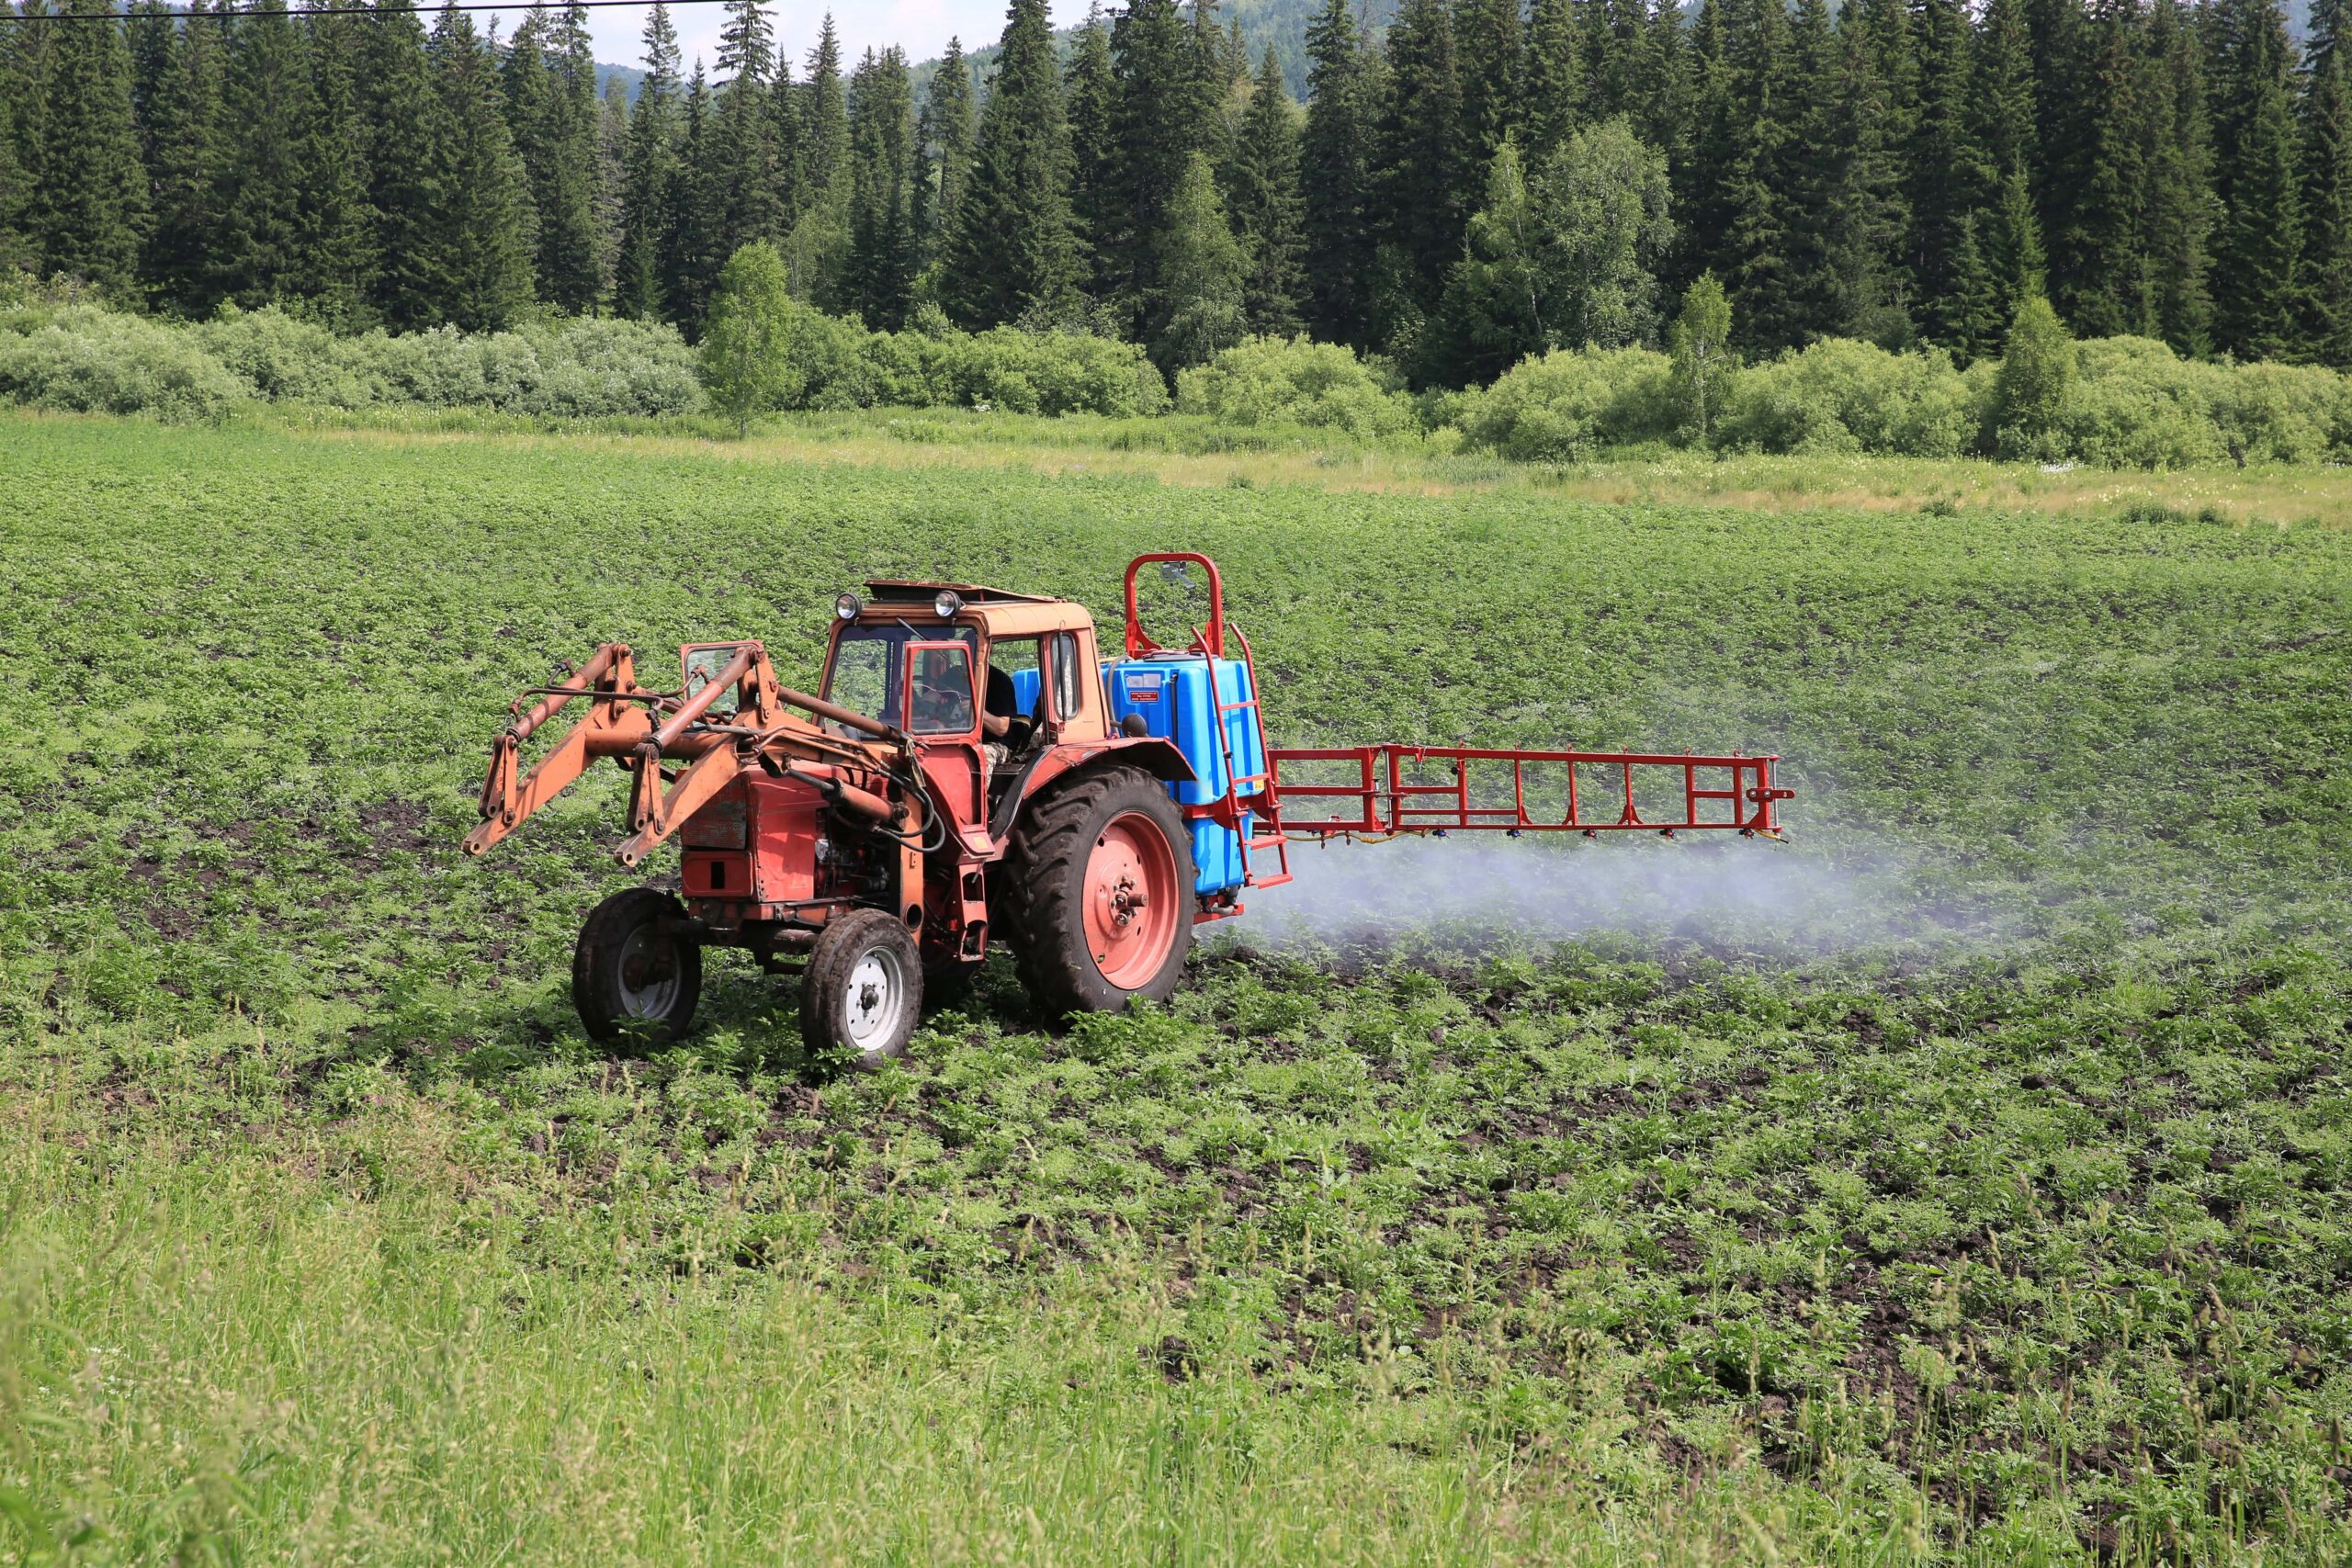 EPA Reconsidering Paraquat’s Re-Approval